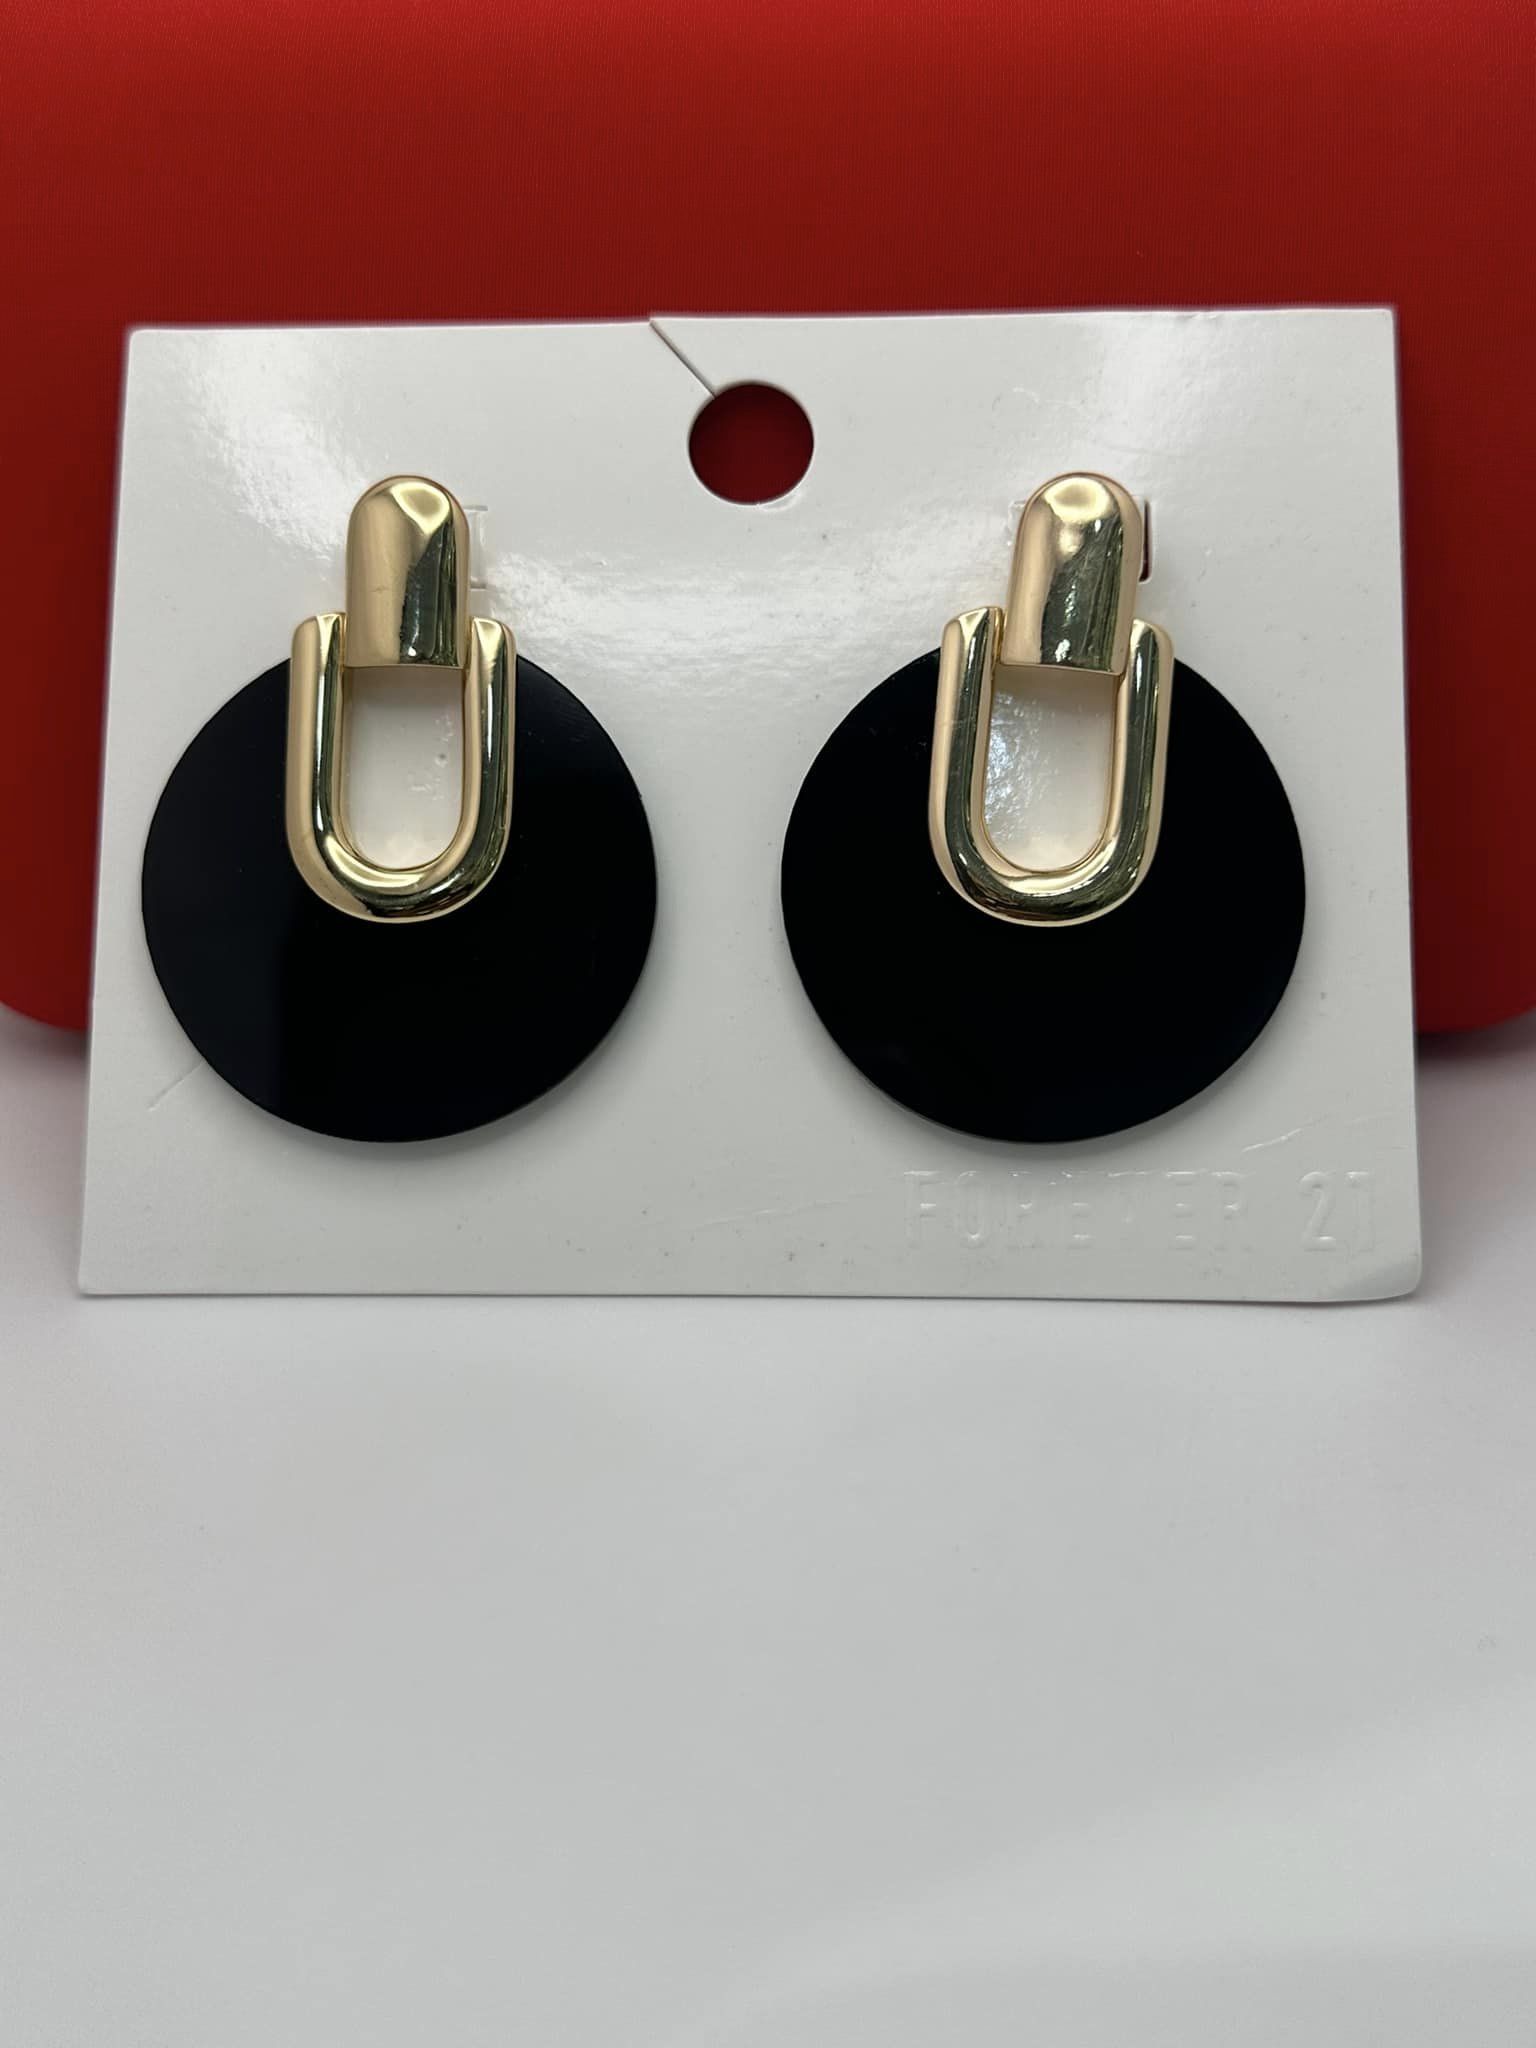 Black with gold earrings